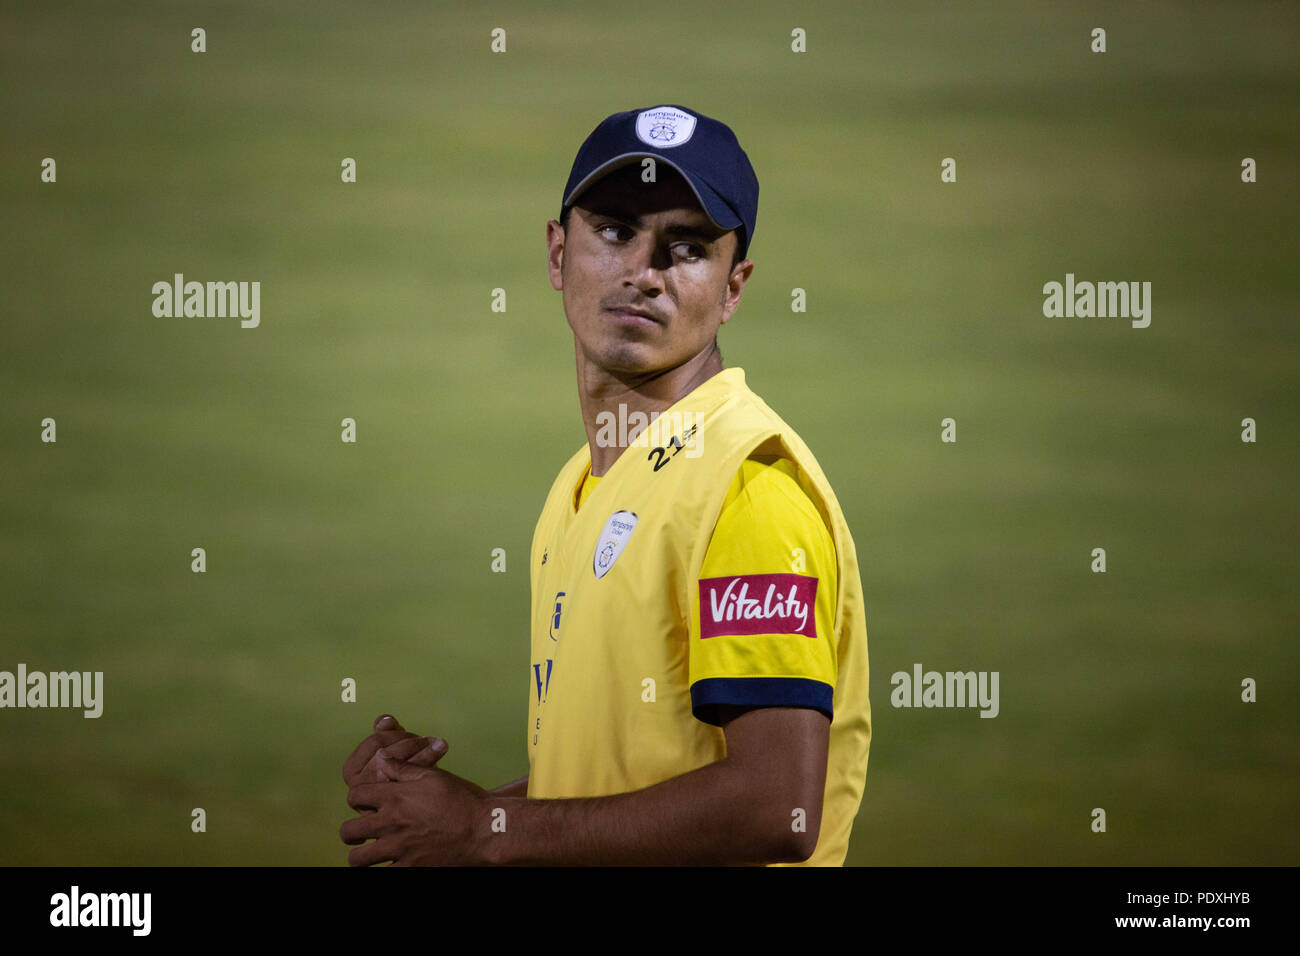 Sophia Gardens, Cardiff, Wales, United Kingdom. Glamorgan hosted Hampshire for a crunch game in the Vitality Blast 20/20 Cricket South Group Stage on 10 August 2018 at Sophia Gardens in Cardiff. Pictured: Hampshire's 17-year-old Afghan mystery spinner Mujeeb Ur Rahman. Credit: Rob Watkins/Alamy Live News Stock Photo